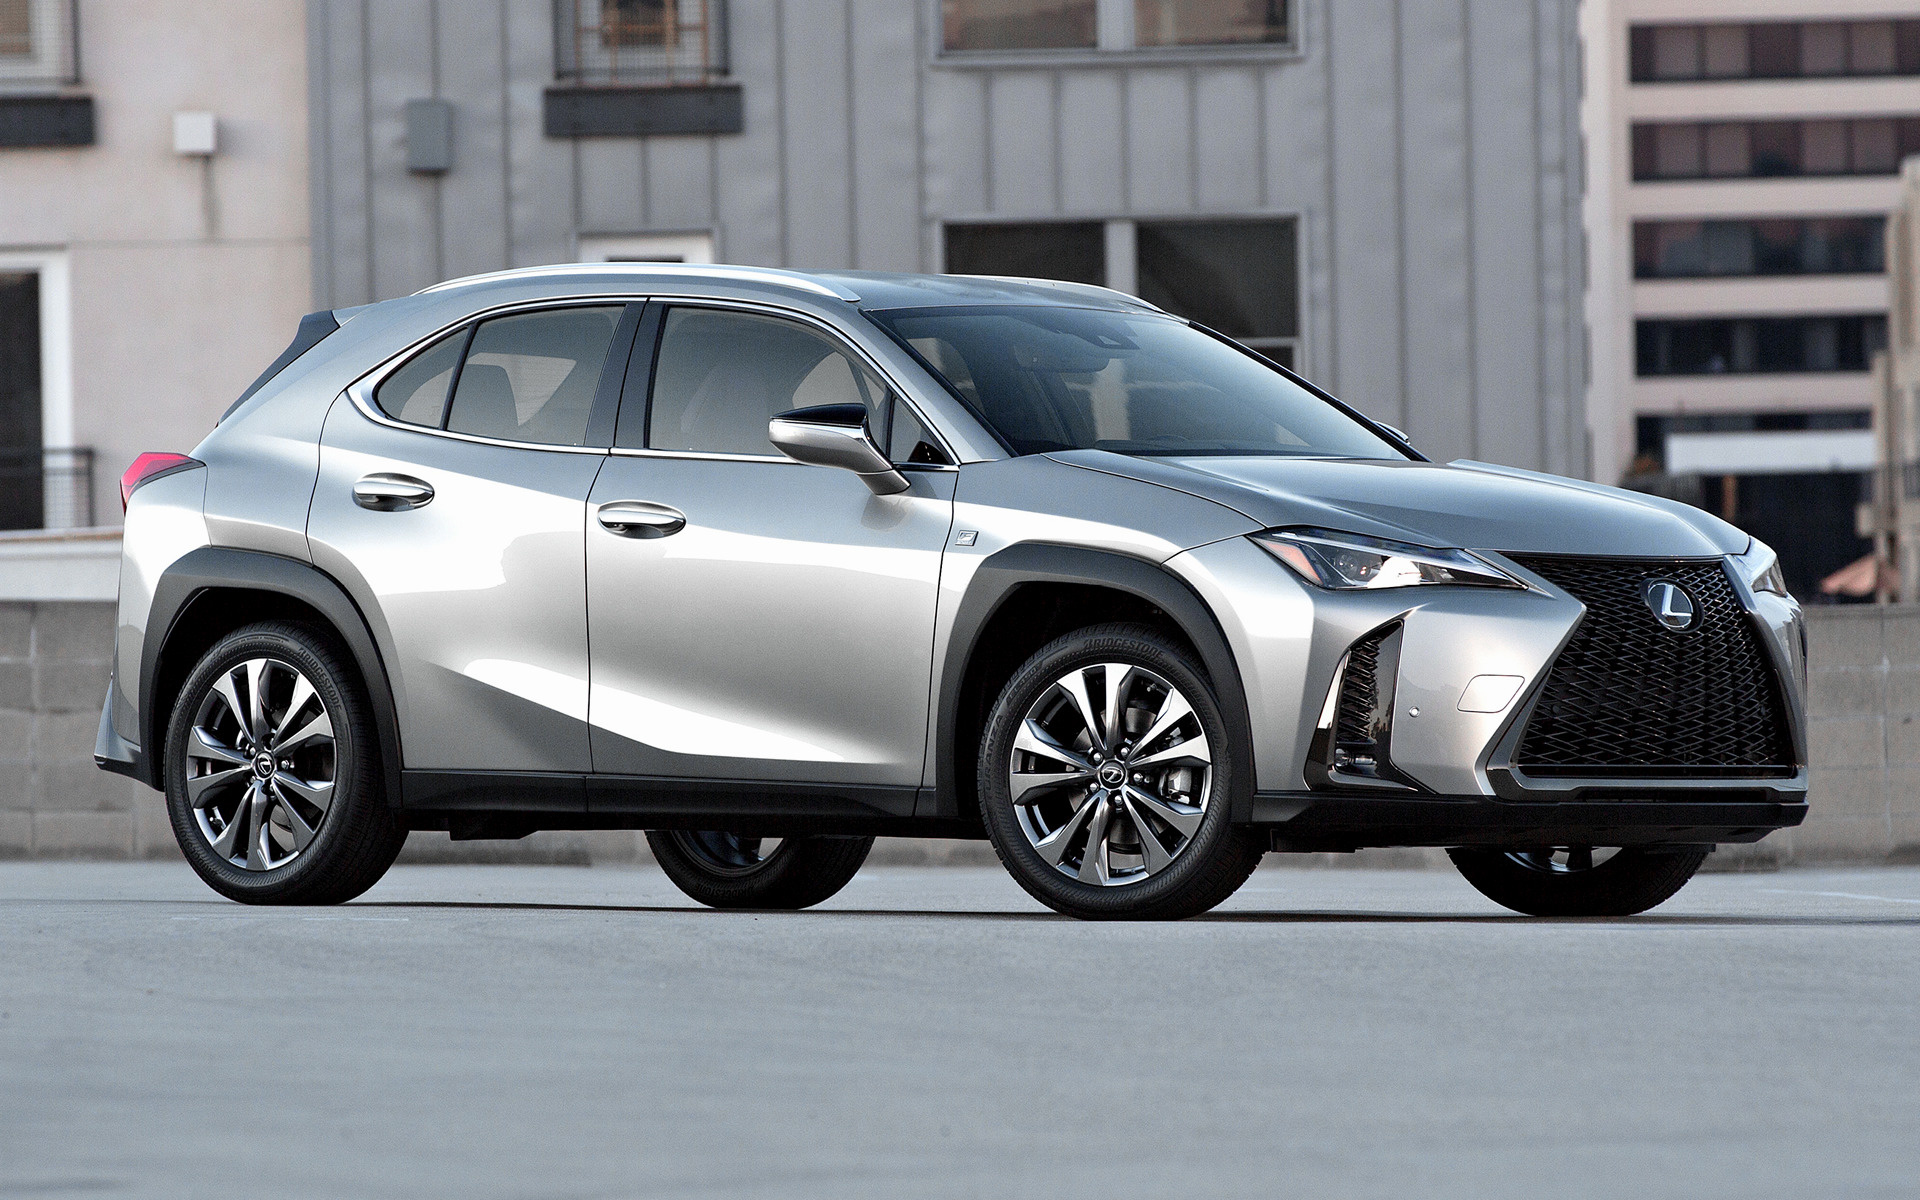 2022 Lexus UX F Sport US Wallpapers and HD Images 